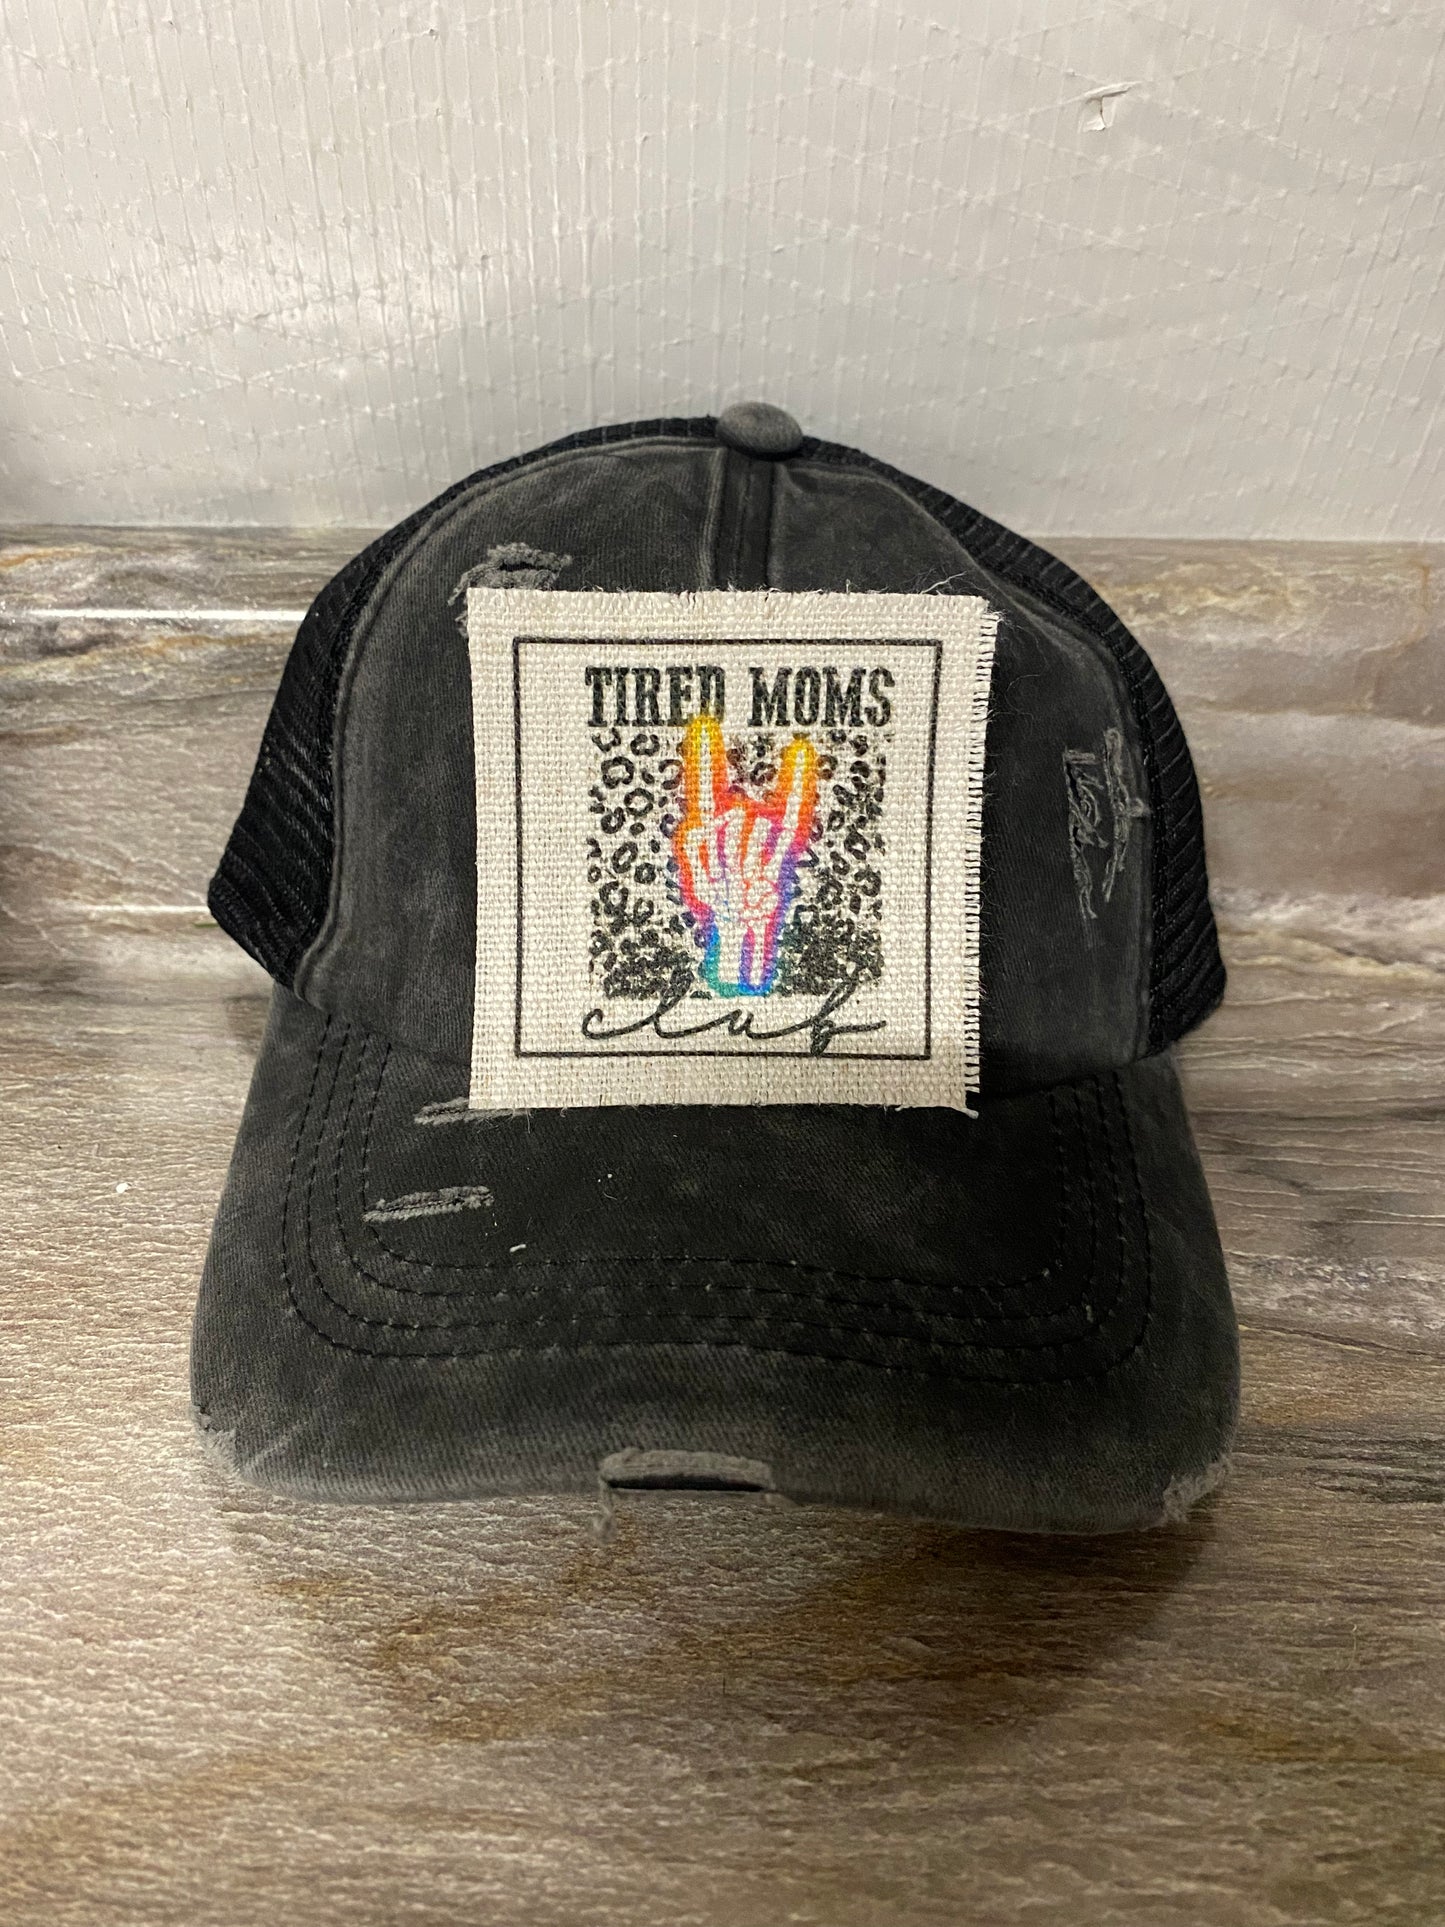 Tired Moms Club Hat Patch